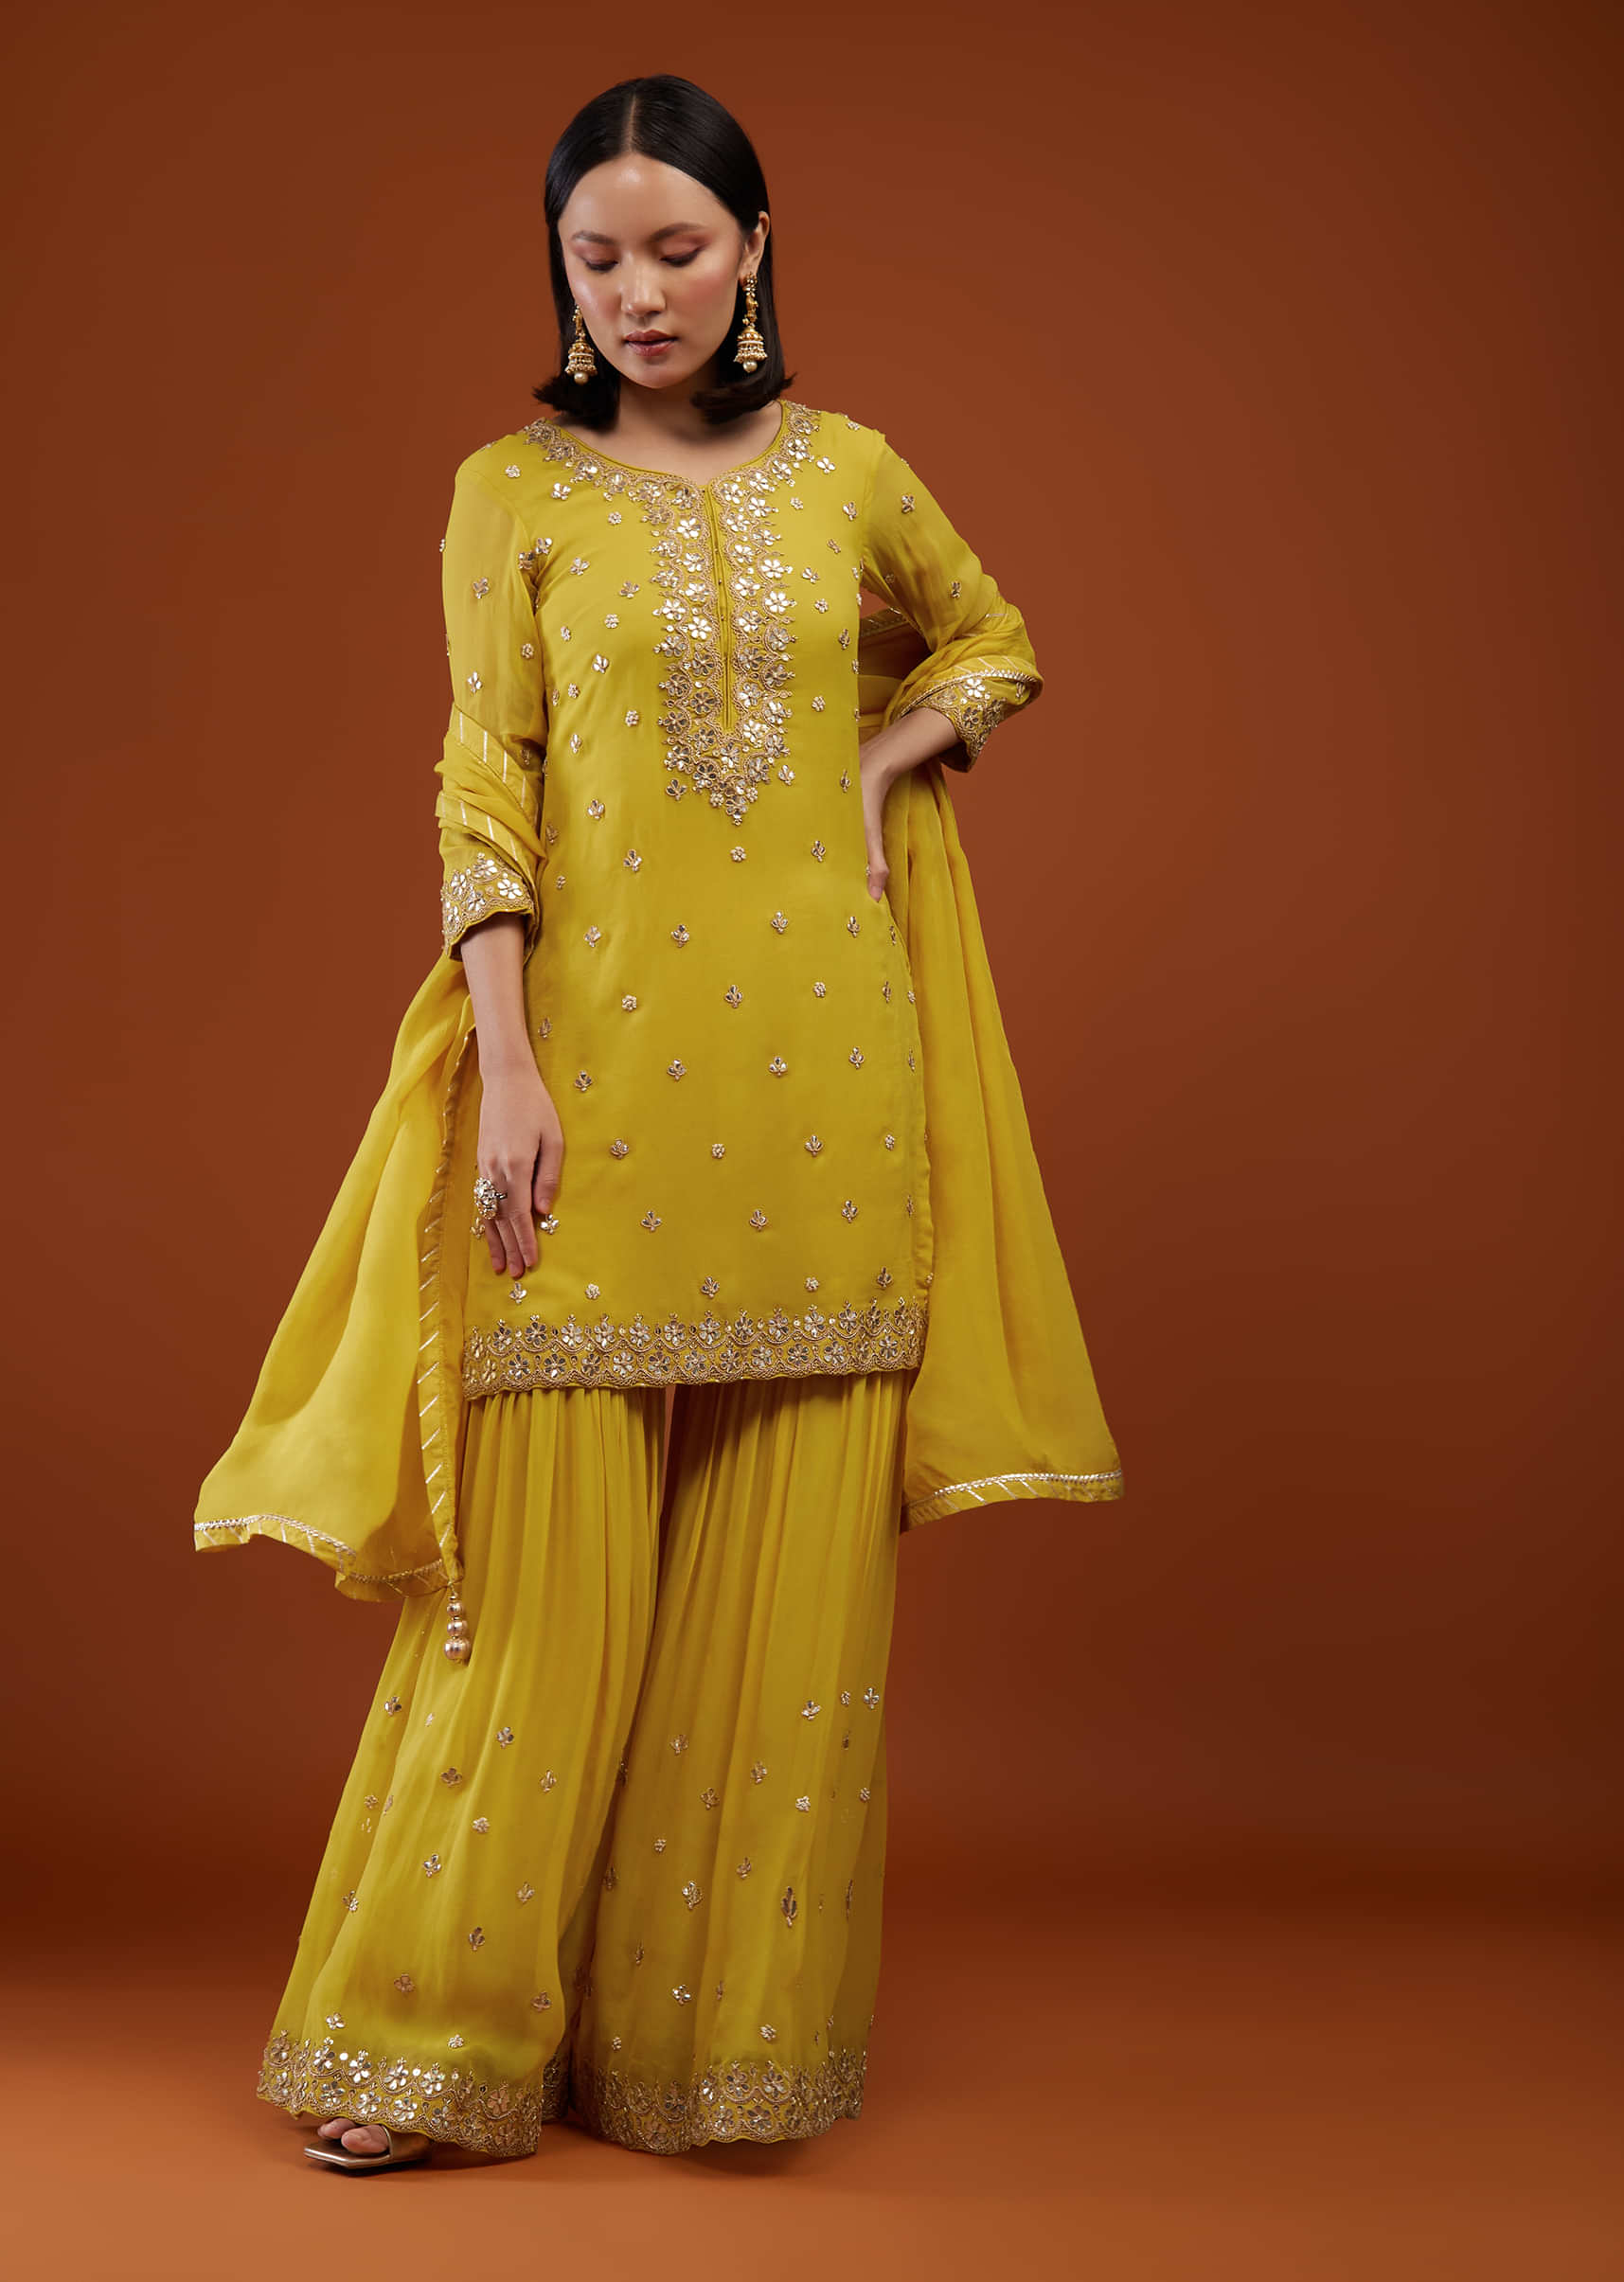 Daffodil Yellow Sharara Suit In Georgette With Embroidery